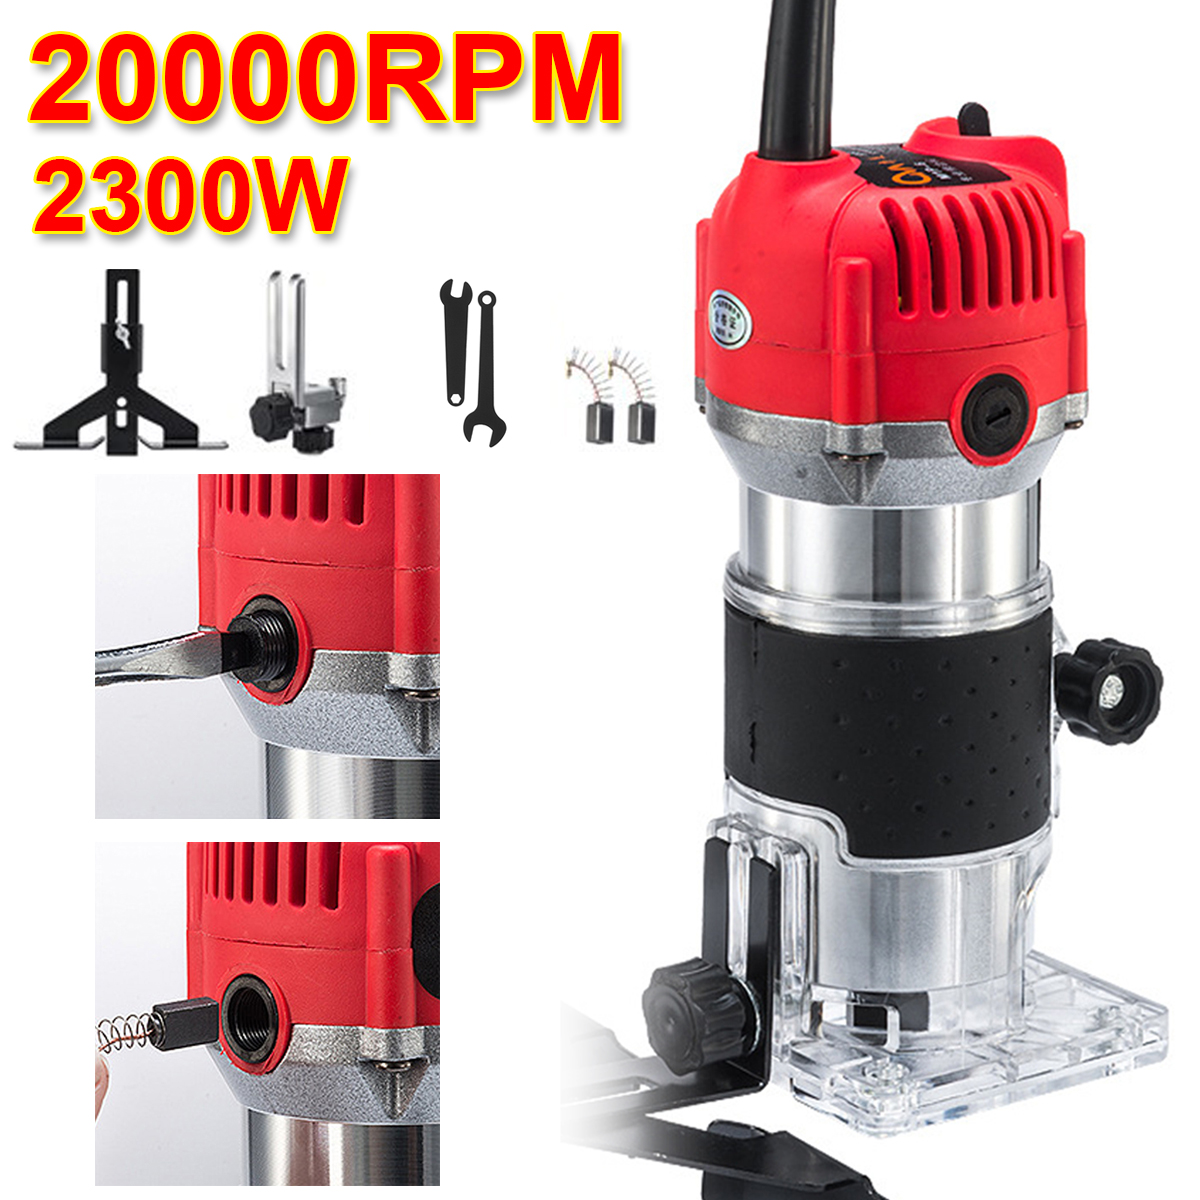 20000rpm-Electric-Hand-Trimmer-Router-Wood-Laminate-Palm-Joiners-Working-Cutting-Tool-1830153-2